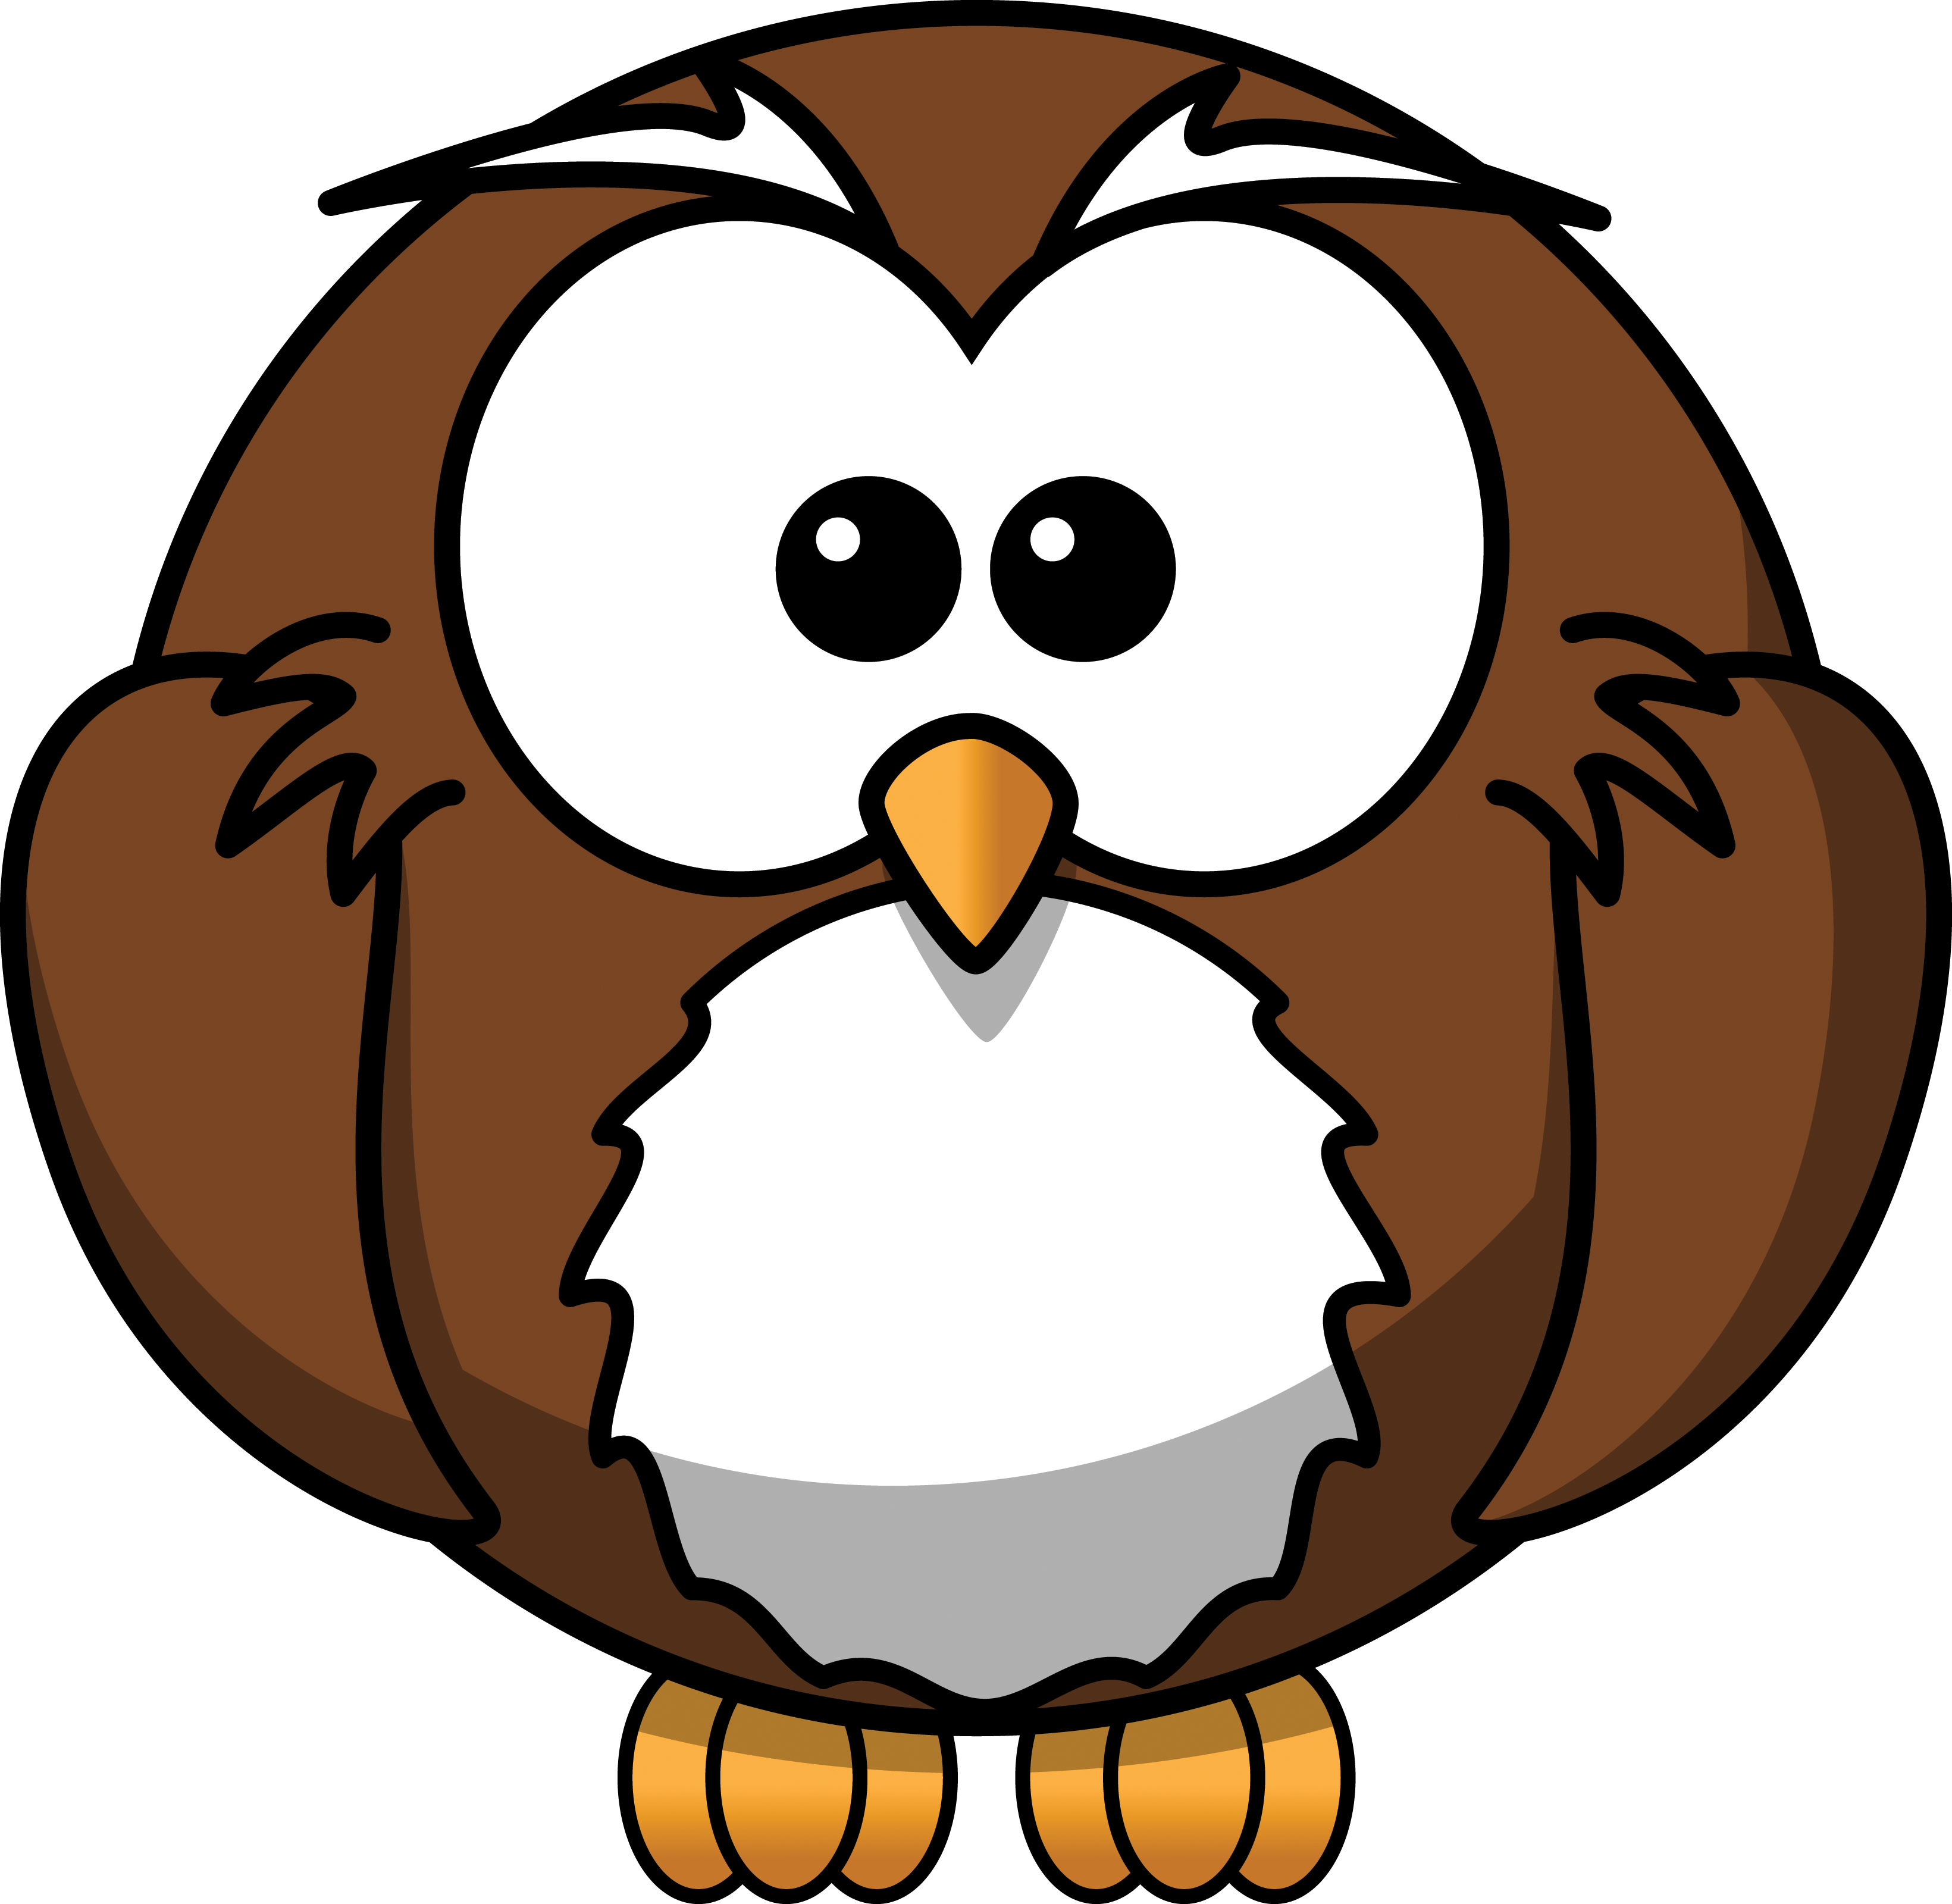 Free Cartoon Picture Of Owl Download Free Cartoon Picture Of Owl Png Images Free Cliparts On Clipart Library